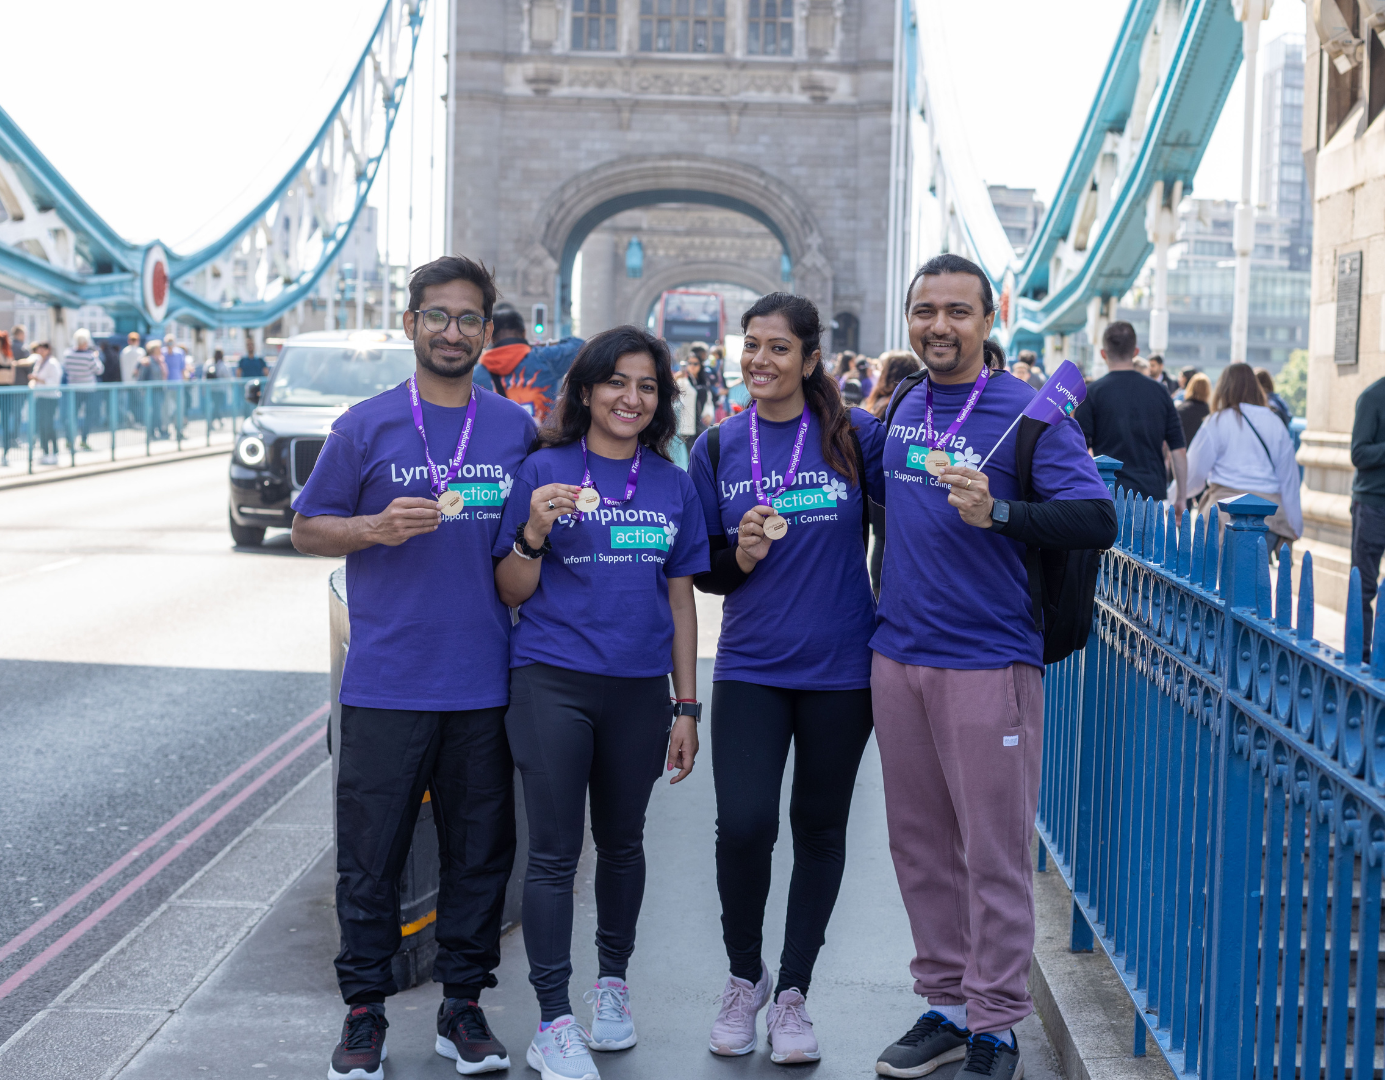 Lymphoma Action supporters at Bridges of London event